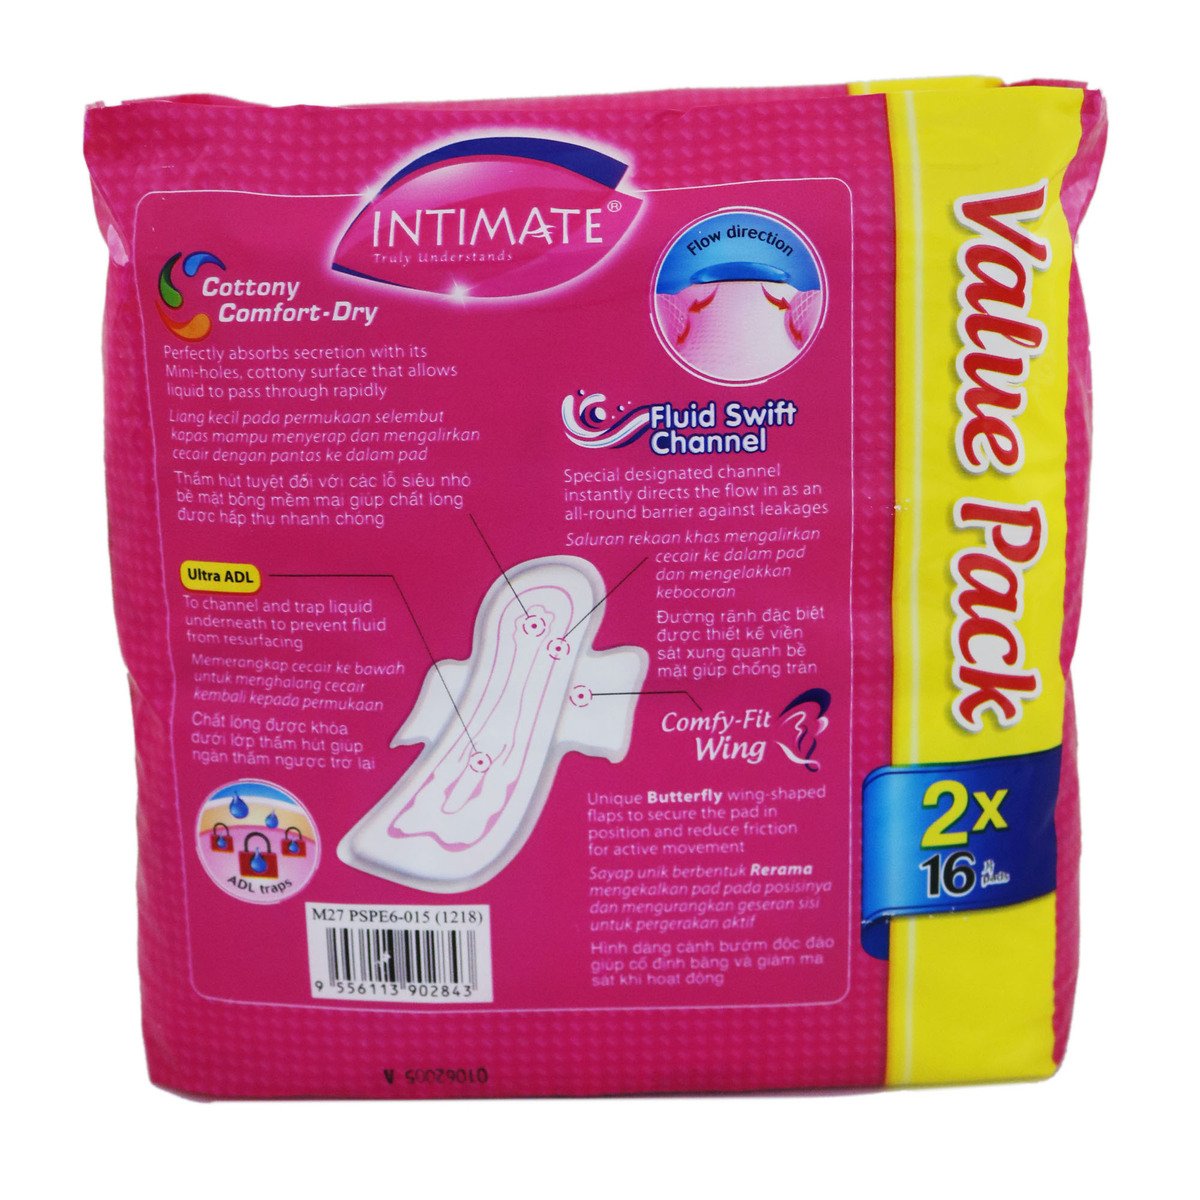 Intimate Daylite Maxi Wing 2 x 16 Counts